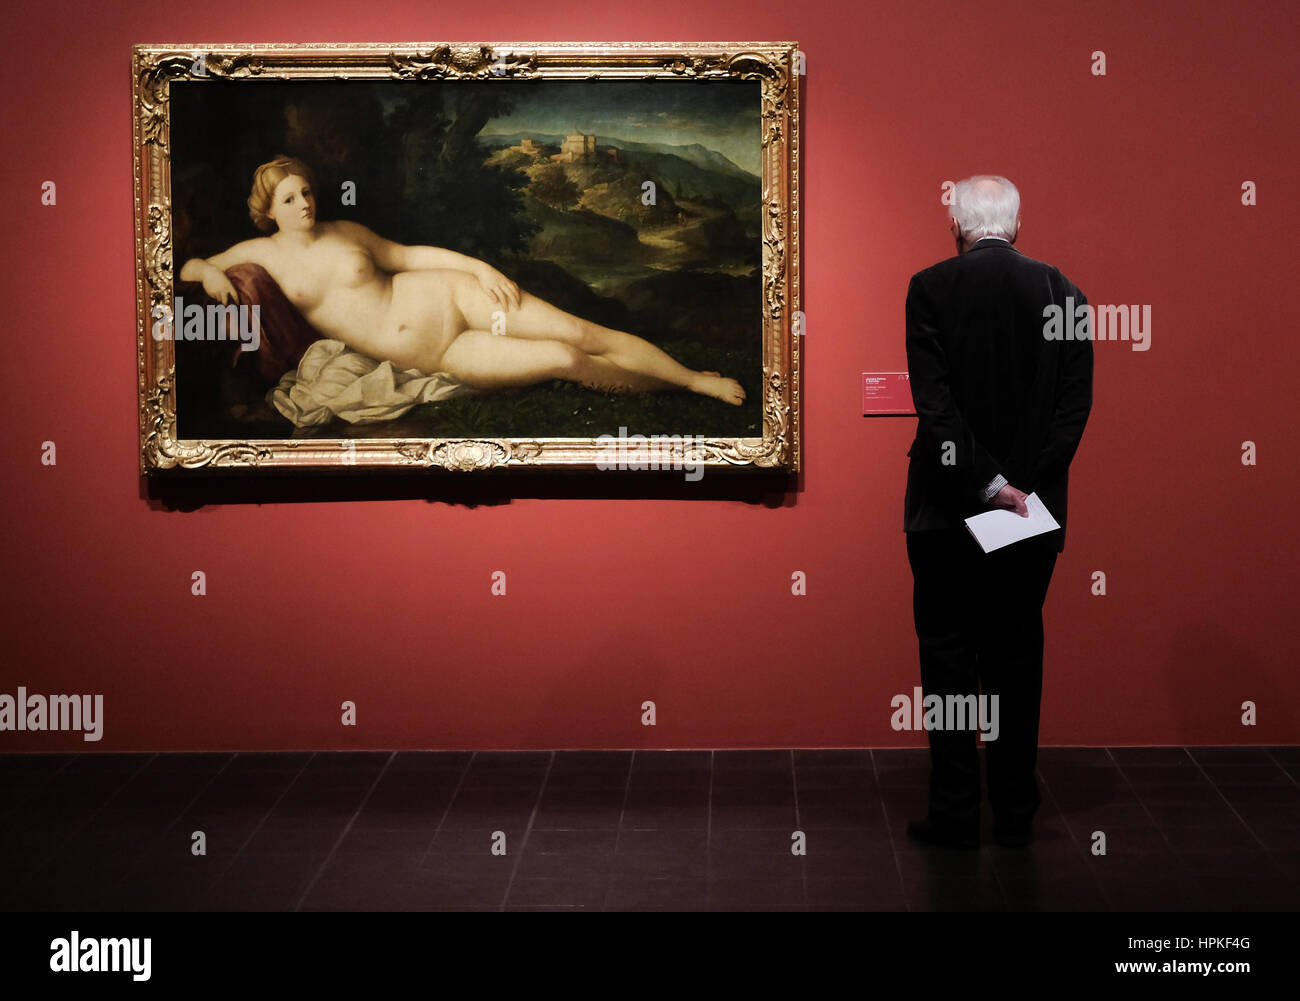 Hamburg, Germany. 23rd Feb, 2017. A man looks at works of art on display as part of an exhibition entitled 'The Poetry of Venetian Painting' in Hamburg, Germany, 23 February 2017. The exhibition will feature the work of artists such as Paris Bordone, Palma il Vecchio and Tizian. The show opens on the 24.02.17 and runs to the 21.05.17. Photo: Axel Heimken/dpa/Alamy Live News Stock Photo